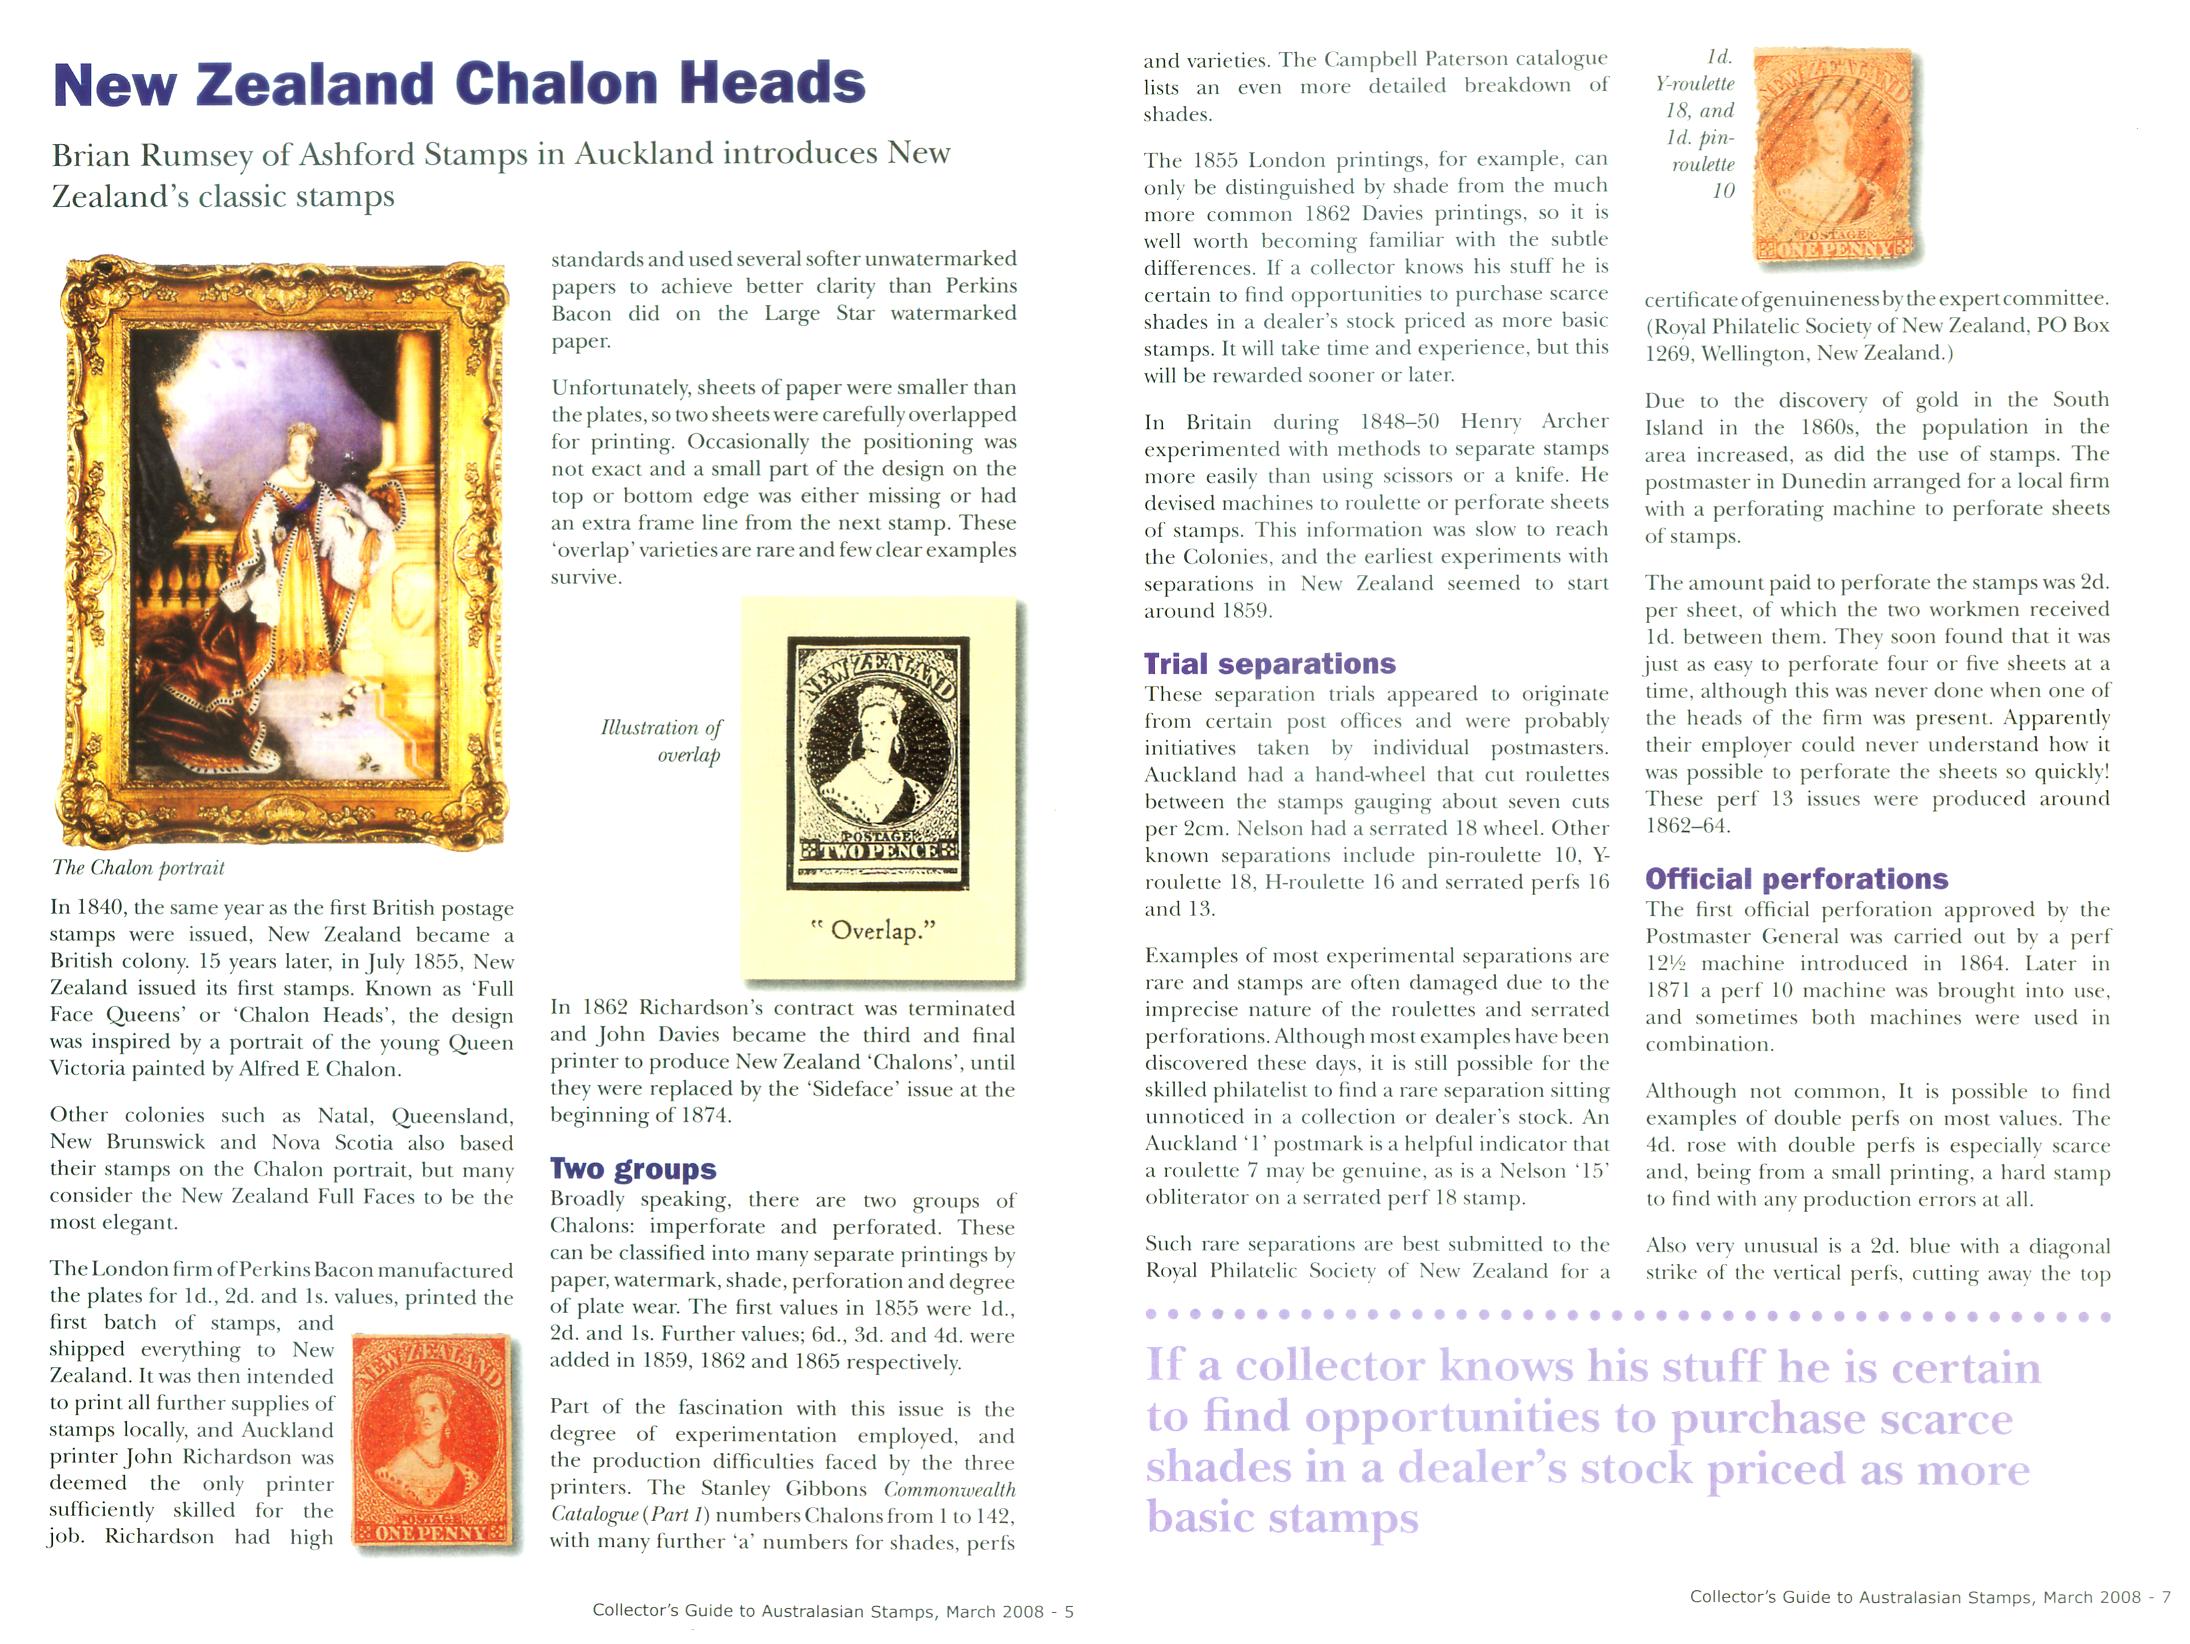 New Zealand Chalons pages 1-2